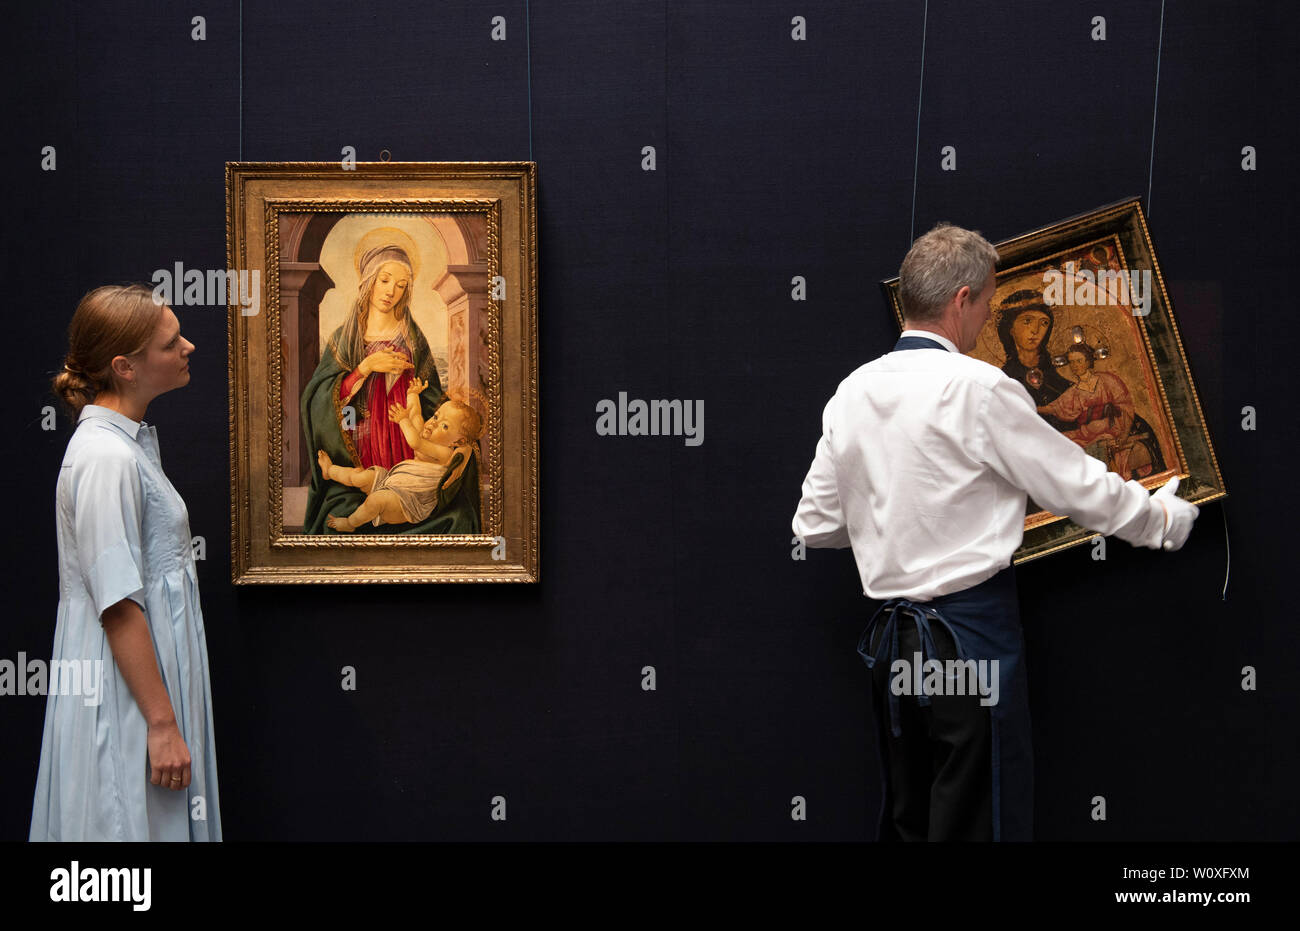 Sotheby’s, London, UK. 28th June 2019. Major works by Botticelli, Brueghel, Rubens and landscapes by Gainsborough, Turner and Constable in one of the most valuable Old Masters sales ever staged, to take place on 3 July 2019. Image (l to r): Sandro Bottocelli and Studio, Madonna and Child, seated before a classical window. Estimate £1,200,000-2,000,000; Earliest painting in the sale, around mid-1230s, Third Master of Anagi, The Madonna and Child, two angels in the spandrels above. Estimate £200,000-300,000. Credit: Malcolm Park/Alamy Live News. Stock Photo